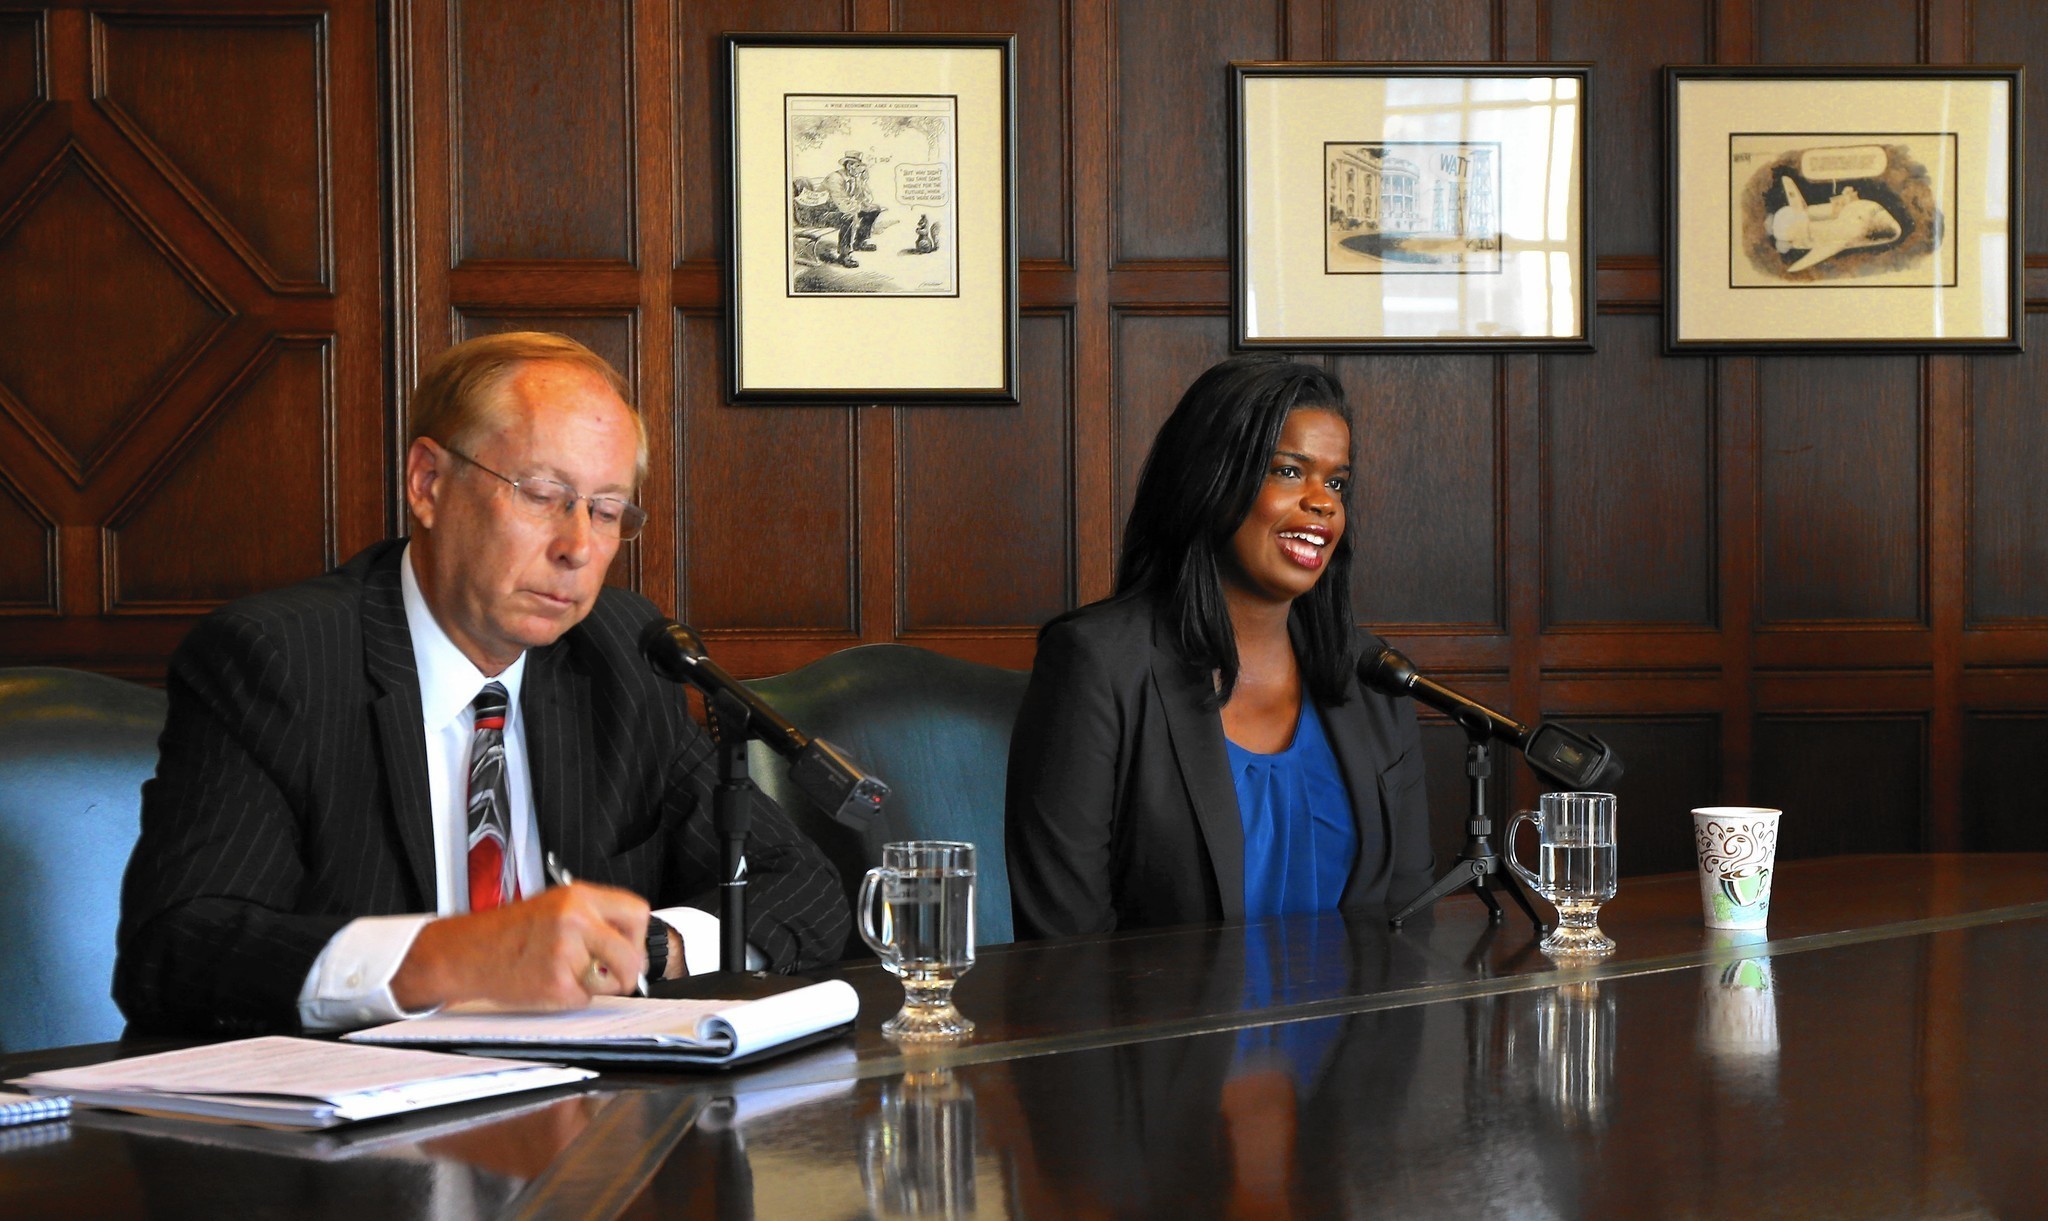 Republican foe says Kim Foxx conflict has 'appearance of impropriety' - Chicago Tribune